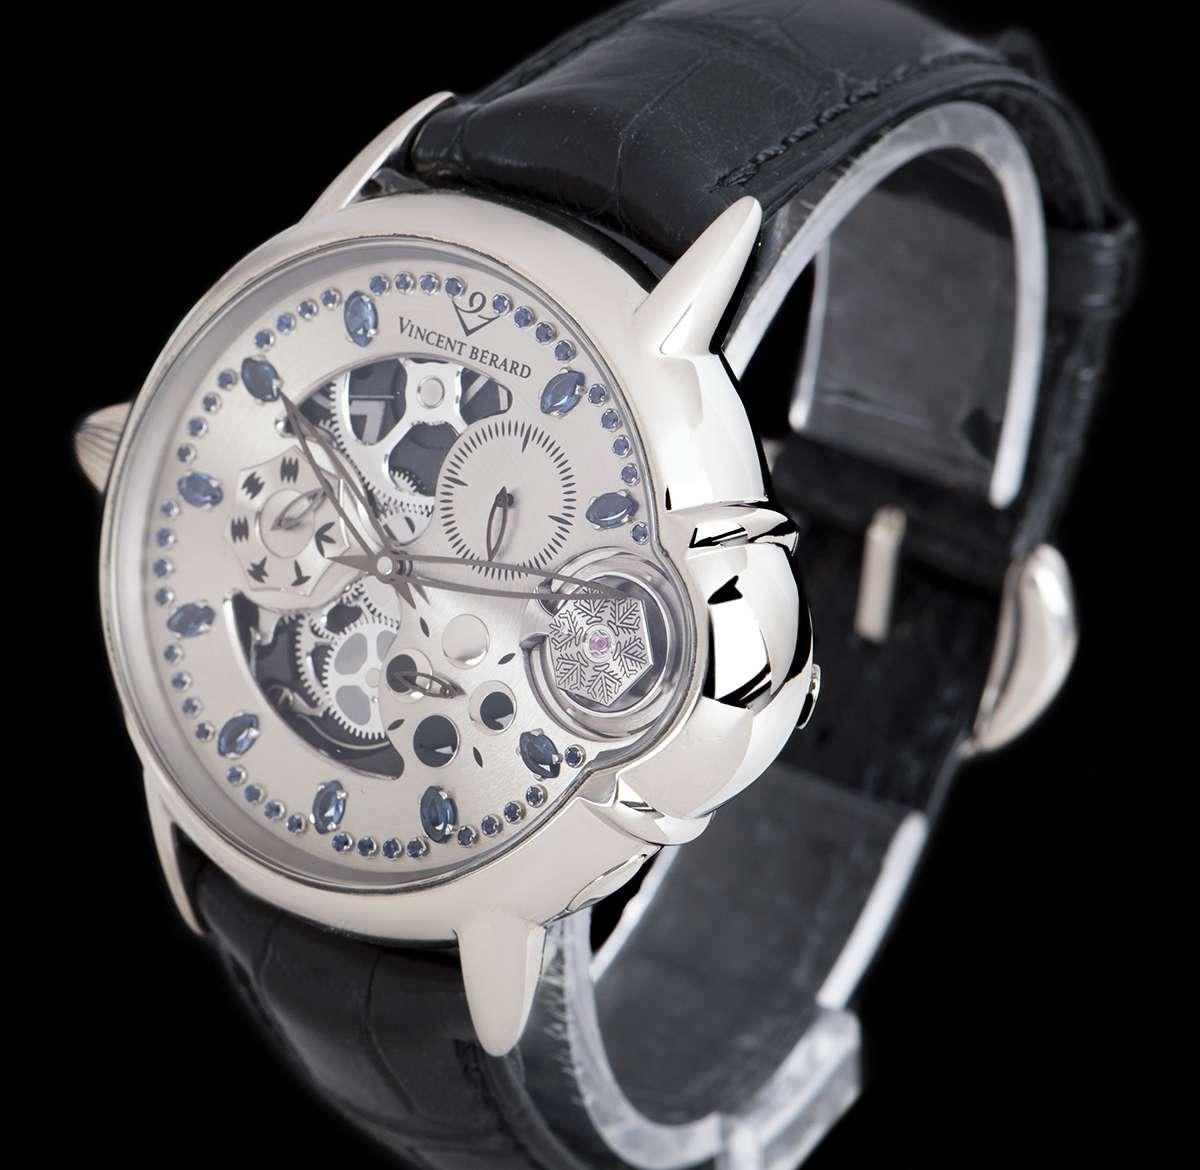 A Limited Edition 18k White Gold Balancier Mysterieux Left-Handed Gents Wristwatch LUV 4S, grey semi-skeleton dial set with 10 applied sapphire hour markers and applied minute markers, small seconds between 1 and 2 0'clock, balance wheel display at